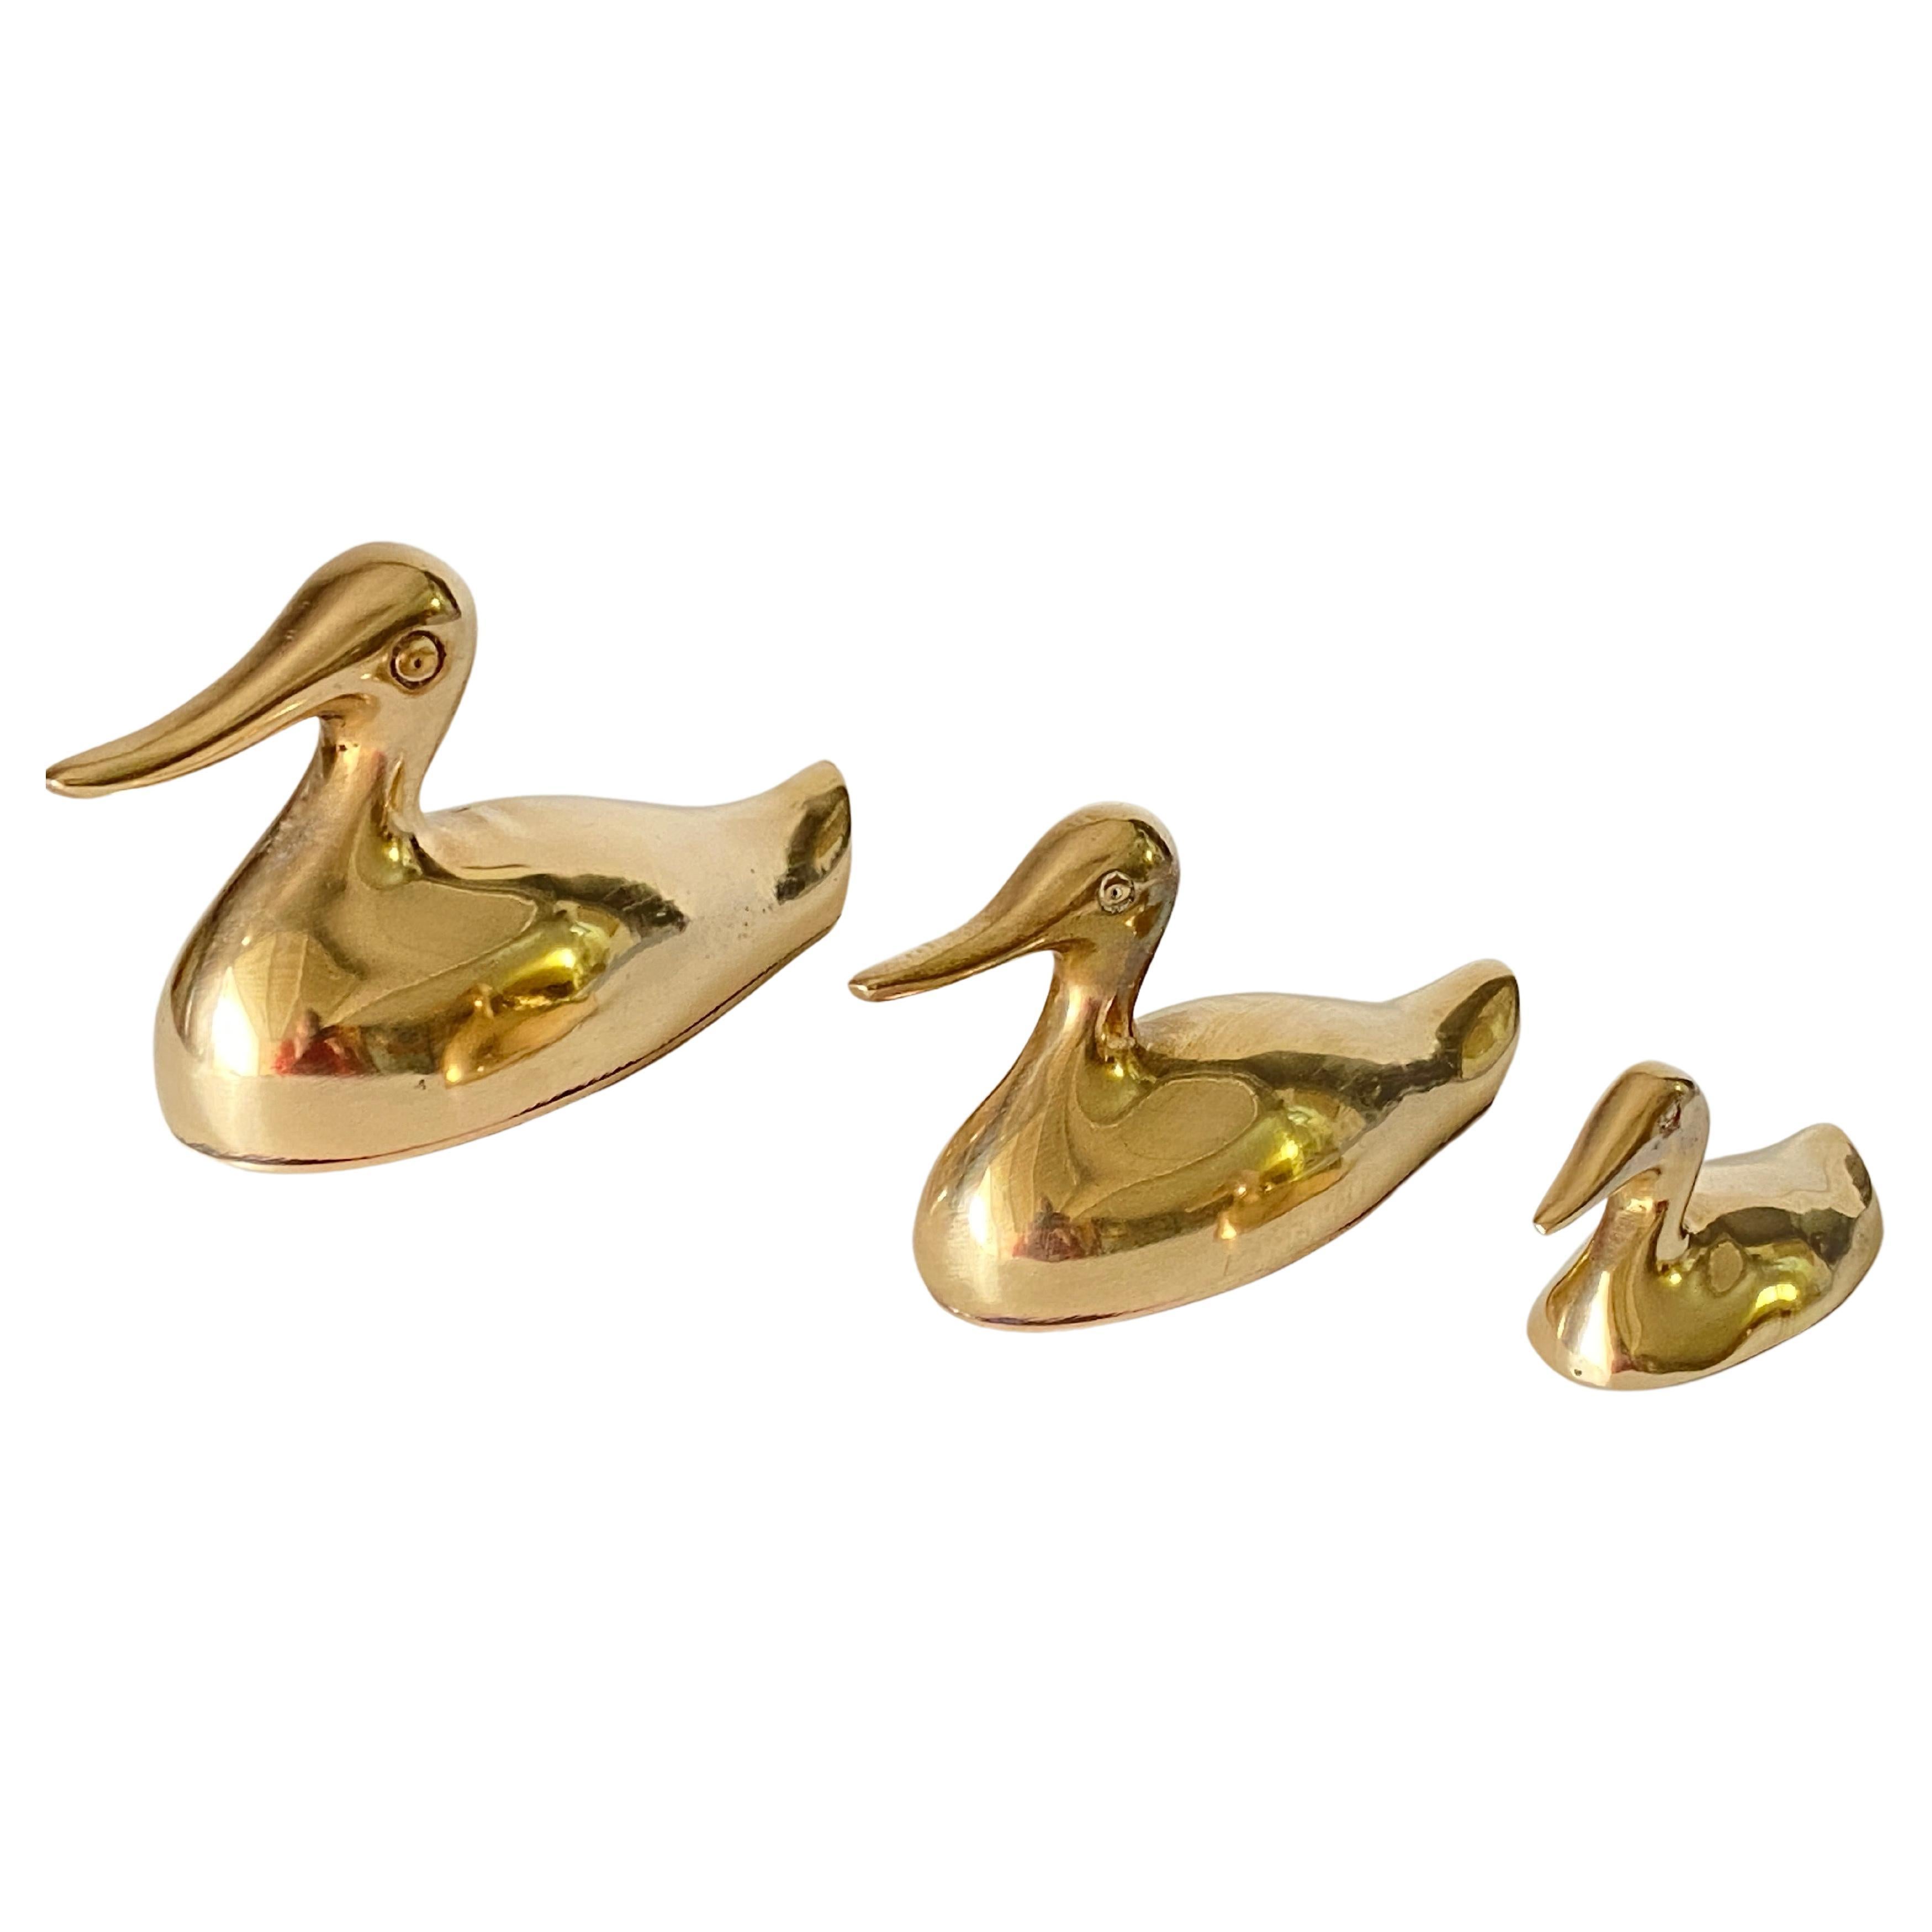 Decorative Set of 3 Sculptures Shaped, in Brass, France, 1970s For Sale